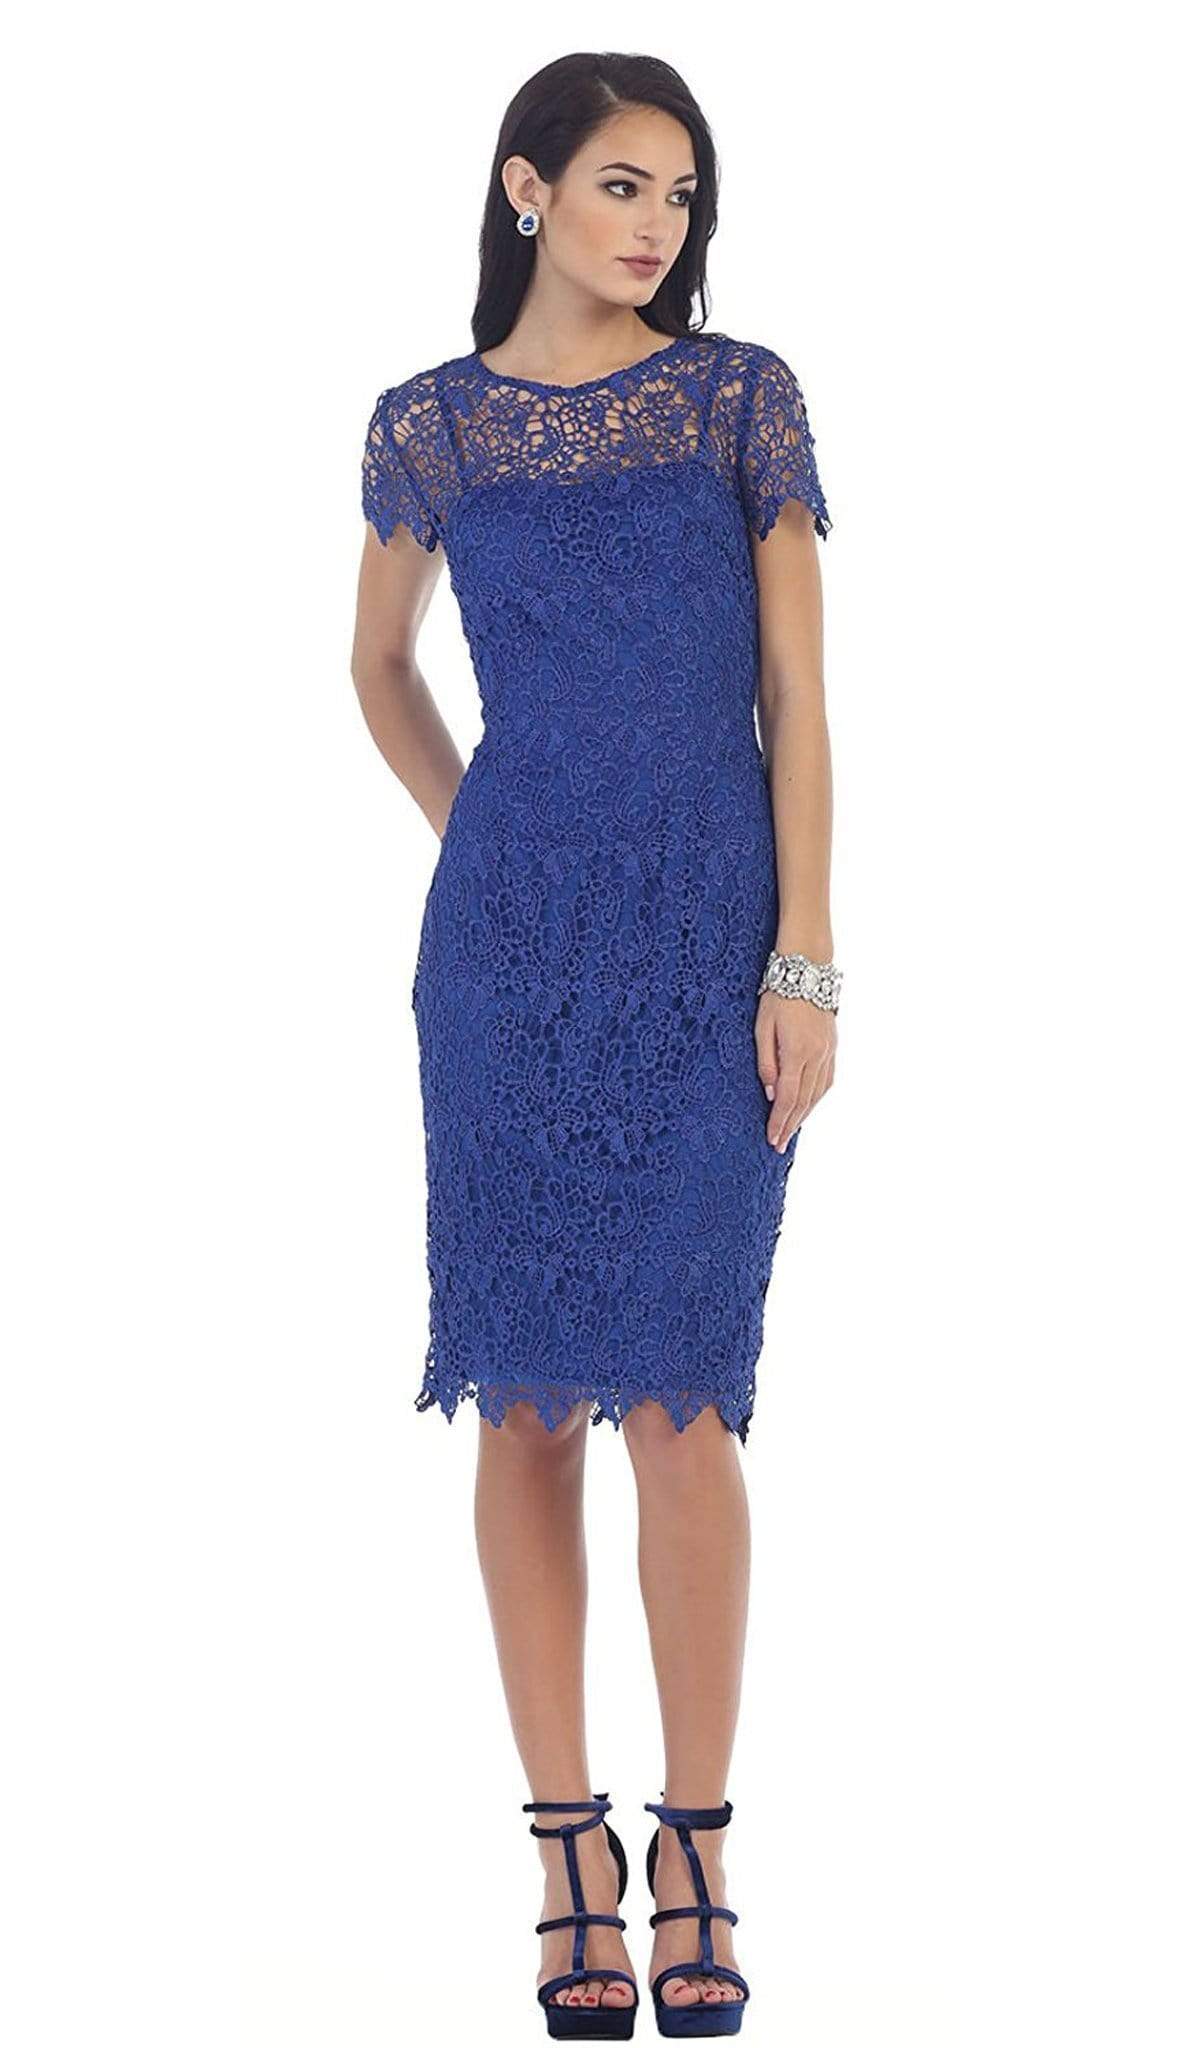 May Queen - MQ1253 Stylish Cap Sleeve Lace Formal Dress CCSALE